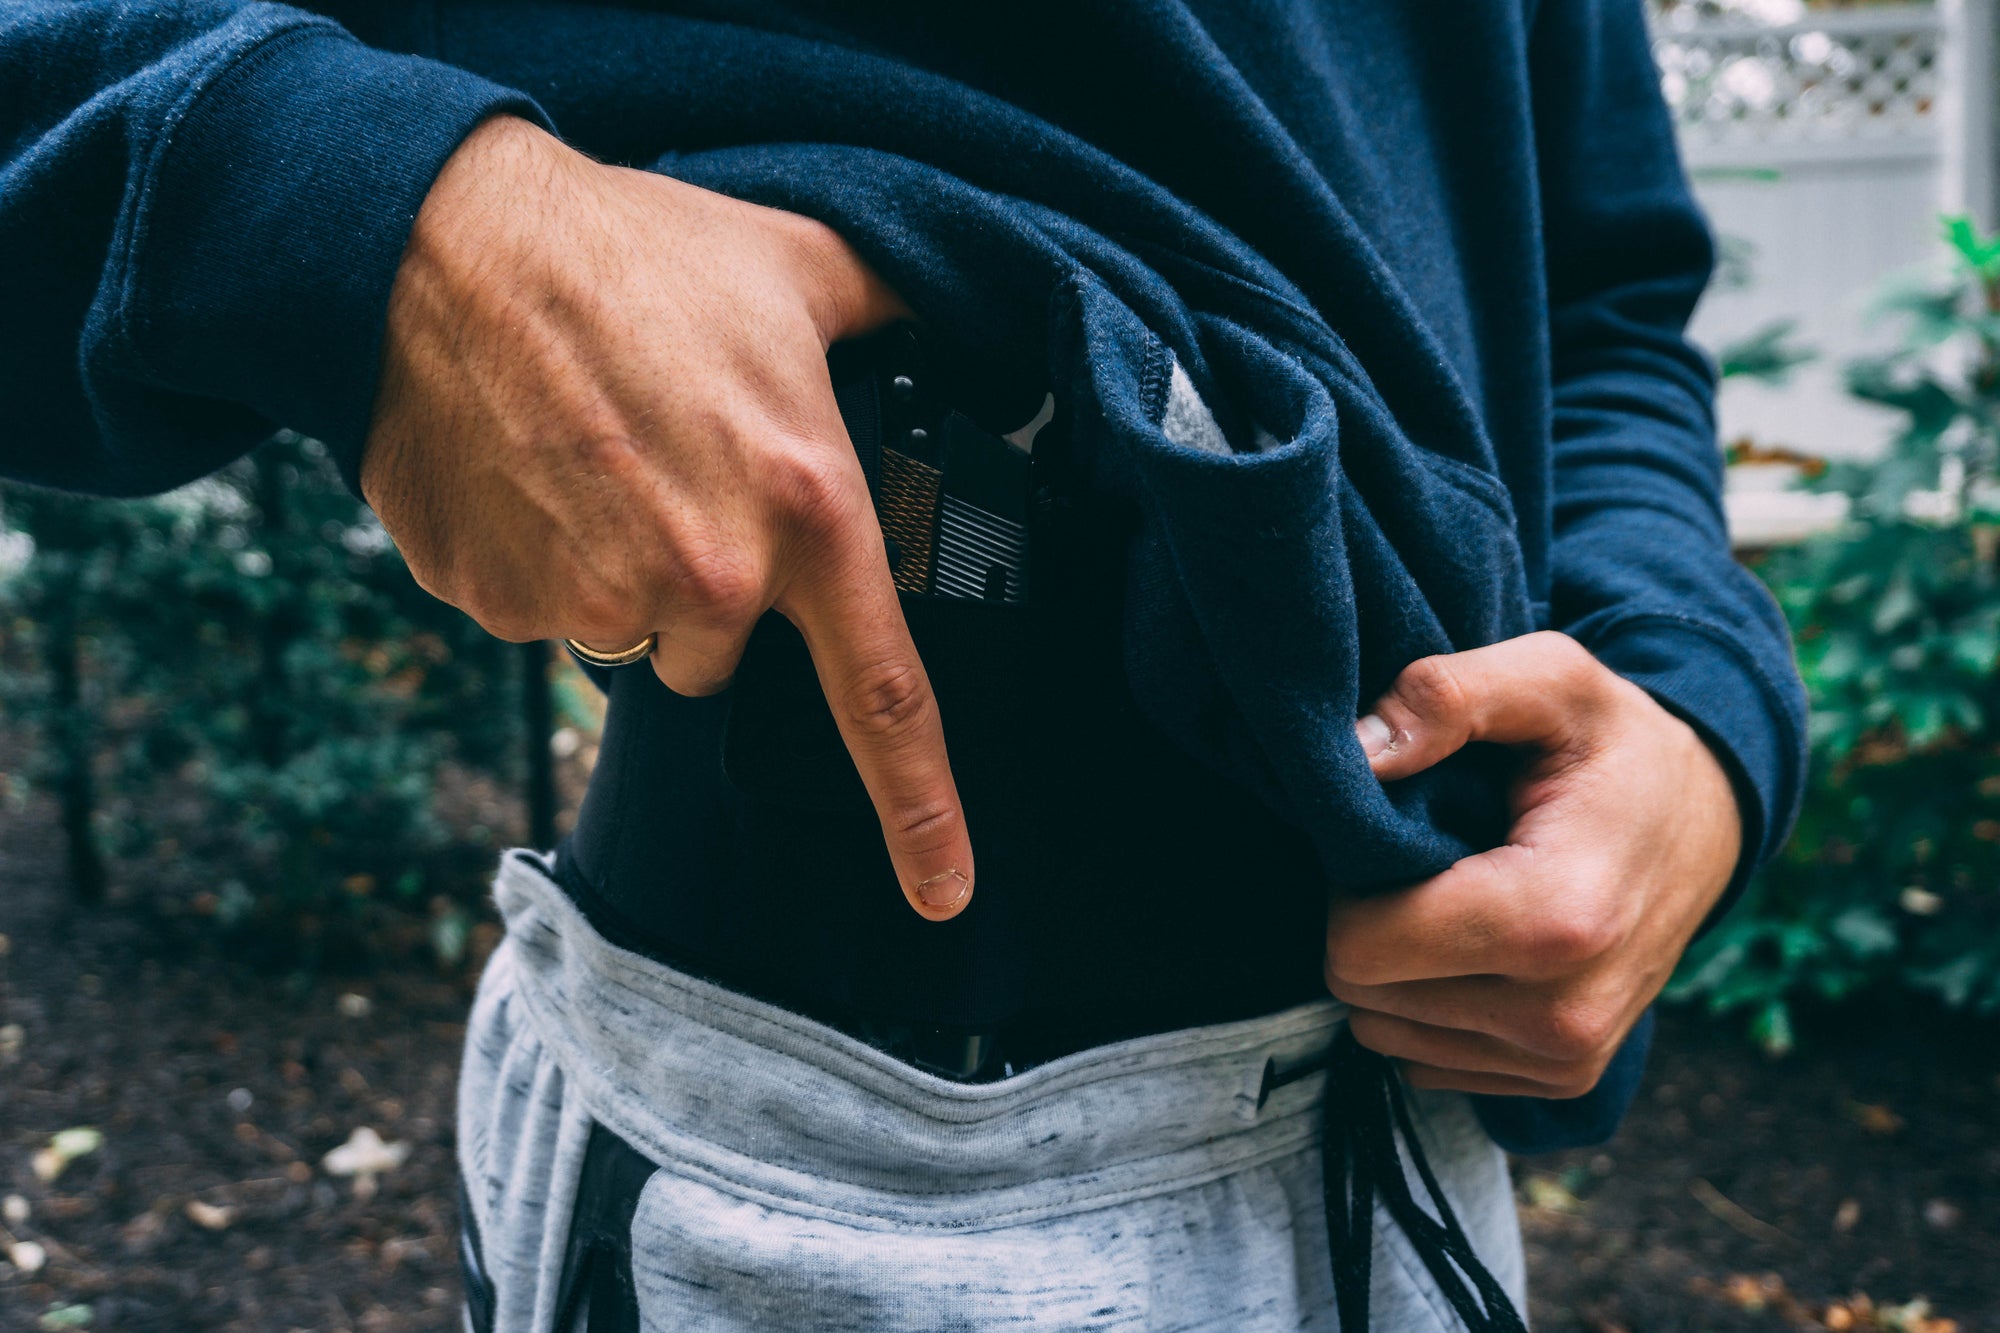 Our Top Tips for Comfortable Concealed Carry